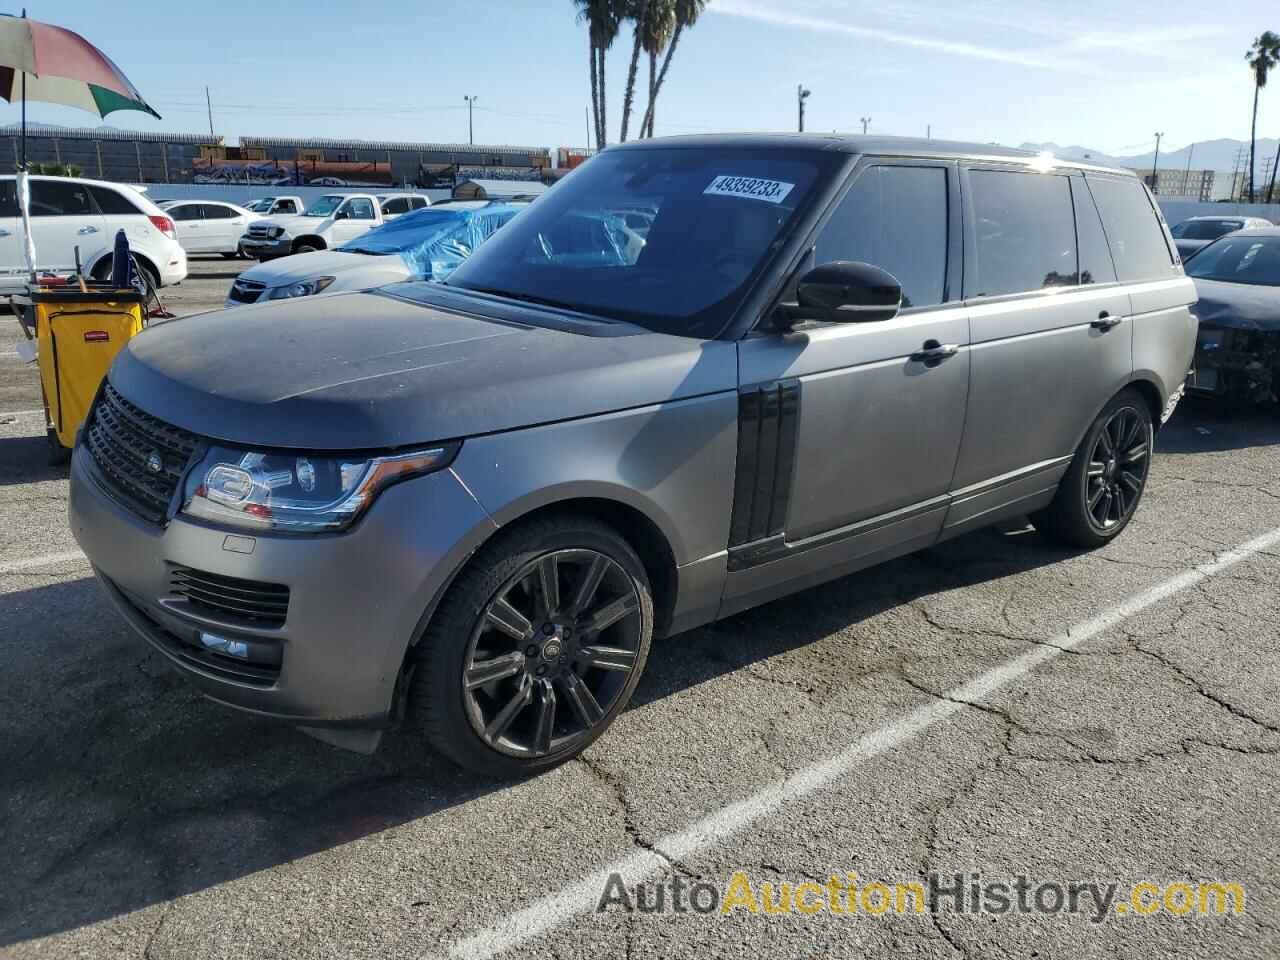 2017 LAND ROVER RANGEROVER SUPERCHARGED, SALGS5FE0HA339140